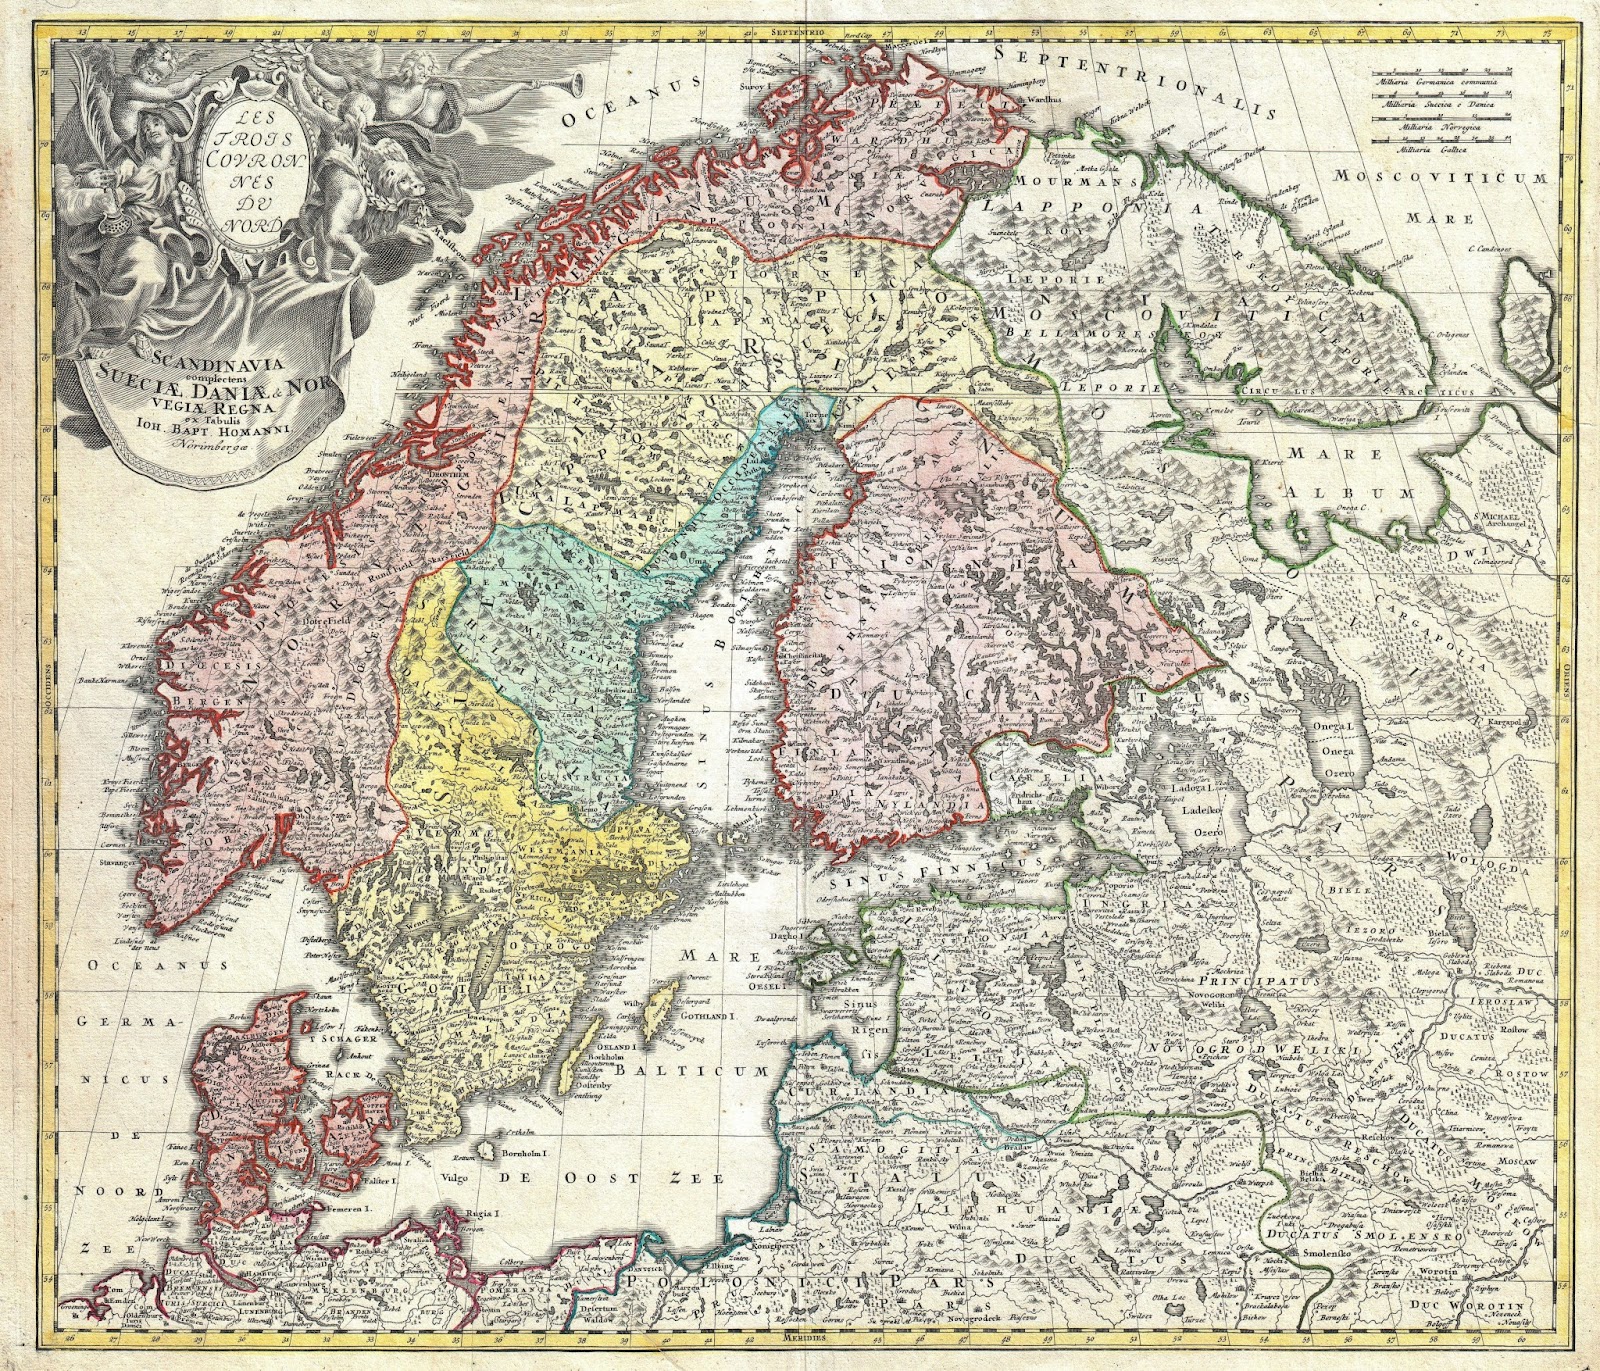 Homann's map of the Scandinavian Peninsula and Fennoscandia with their surrounding territories: northern Germany, northern Poland, the Baltic region, Livonia, Belarus, and parts of Northwest Russia. Johann Baptist Homann (1664–1724) was a German geographer and cartographer; map dated around 1730.